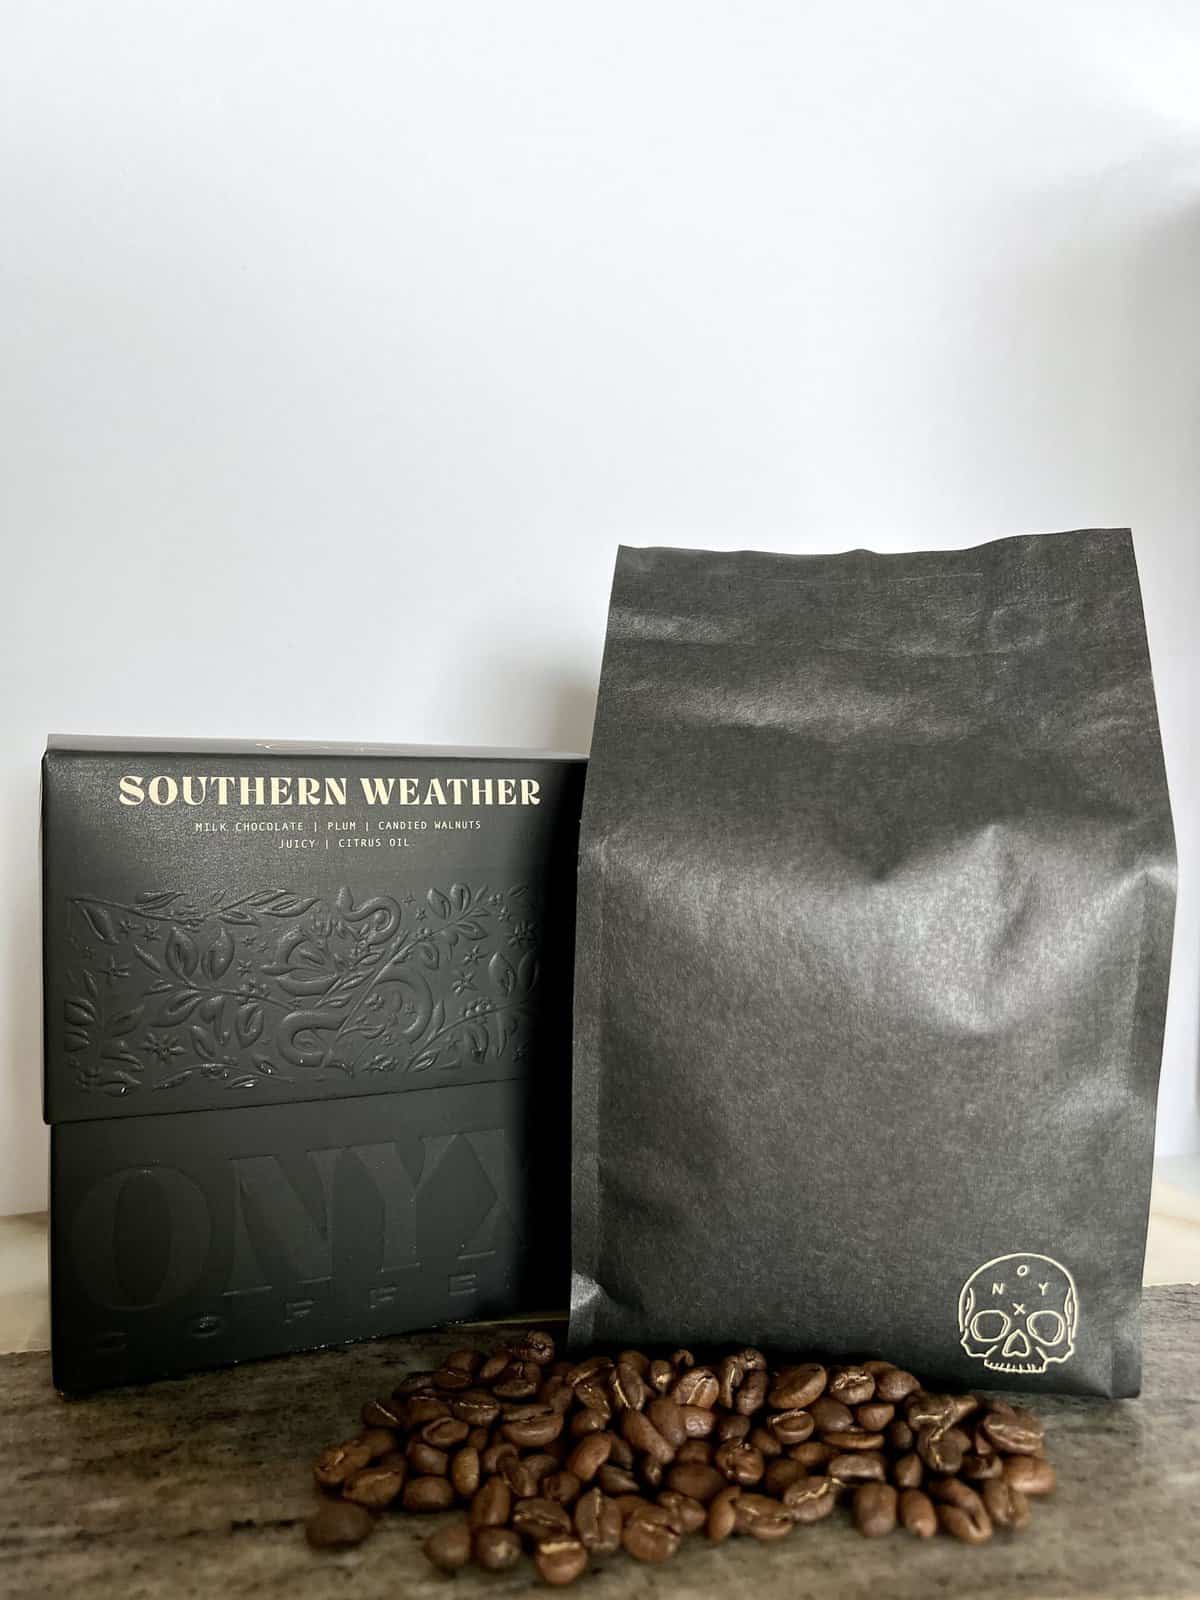 Onyx-Coffee-Lab-Southern-Weather-coffee-packaging-stands-on-coffee-beans-next-to-the-shipping-box-scaled